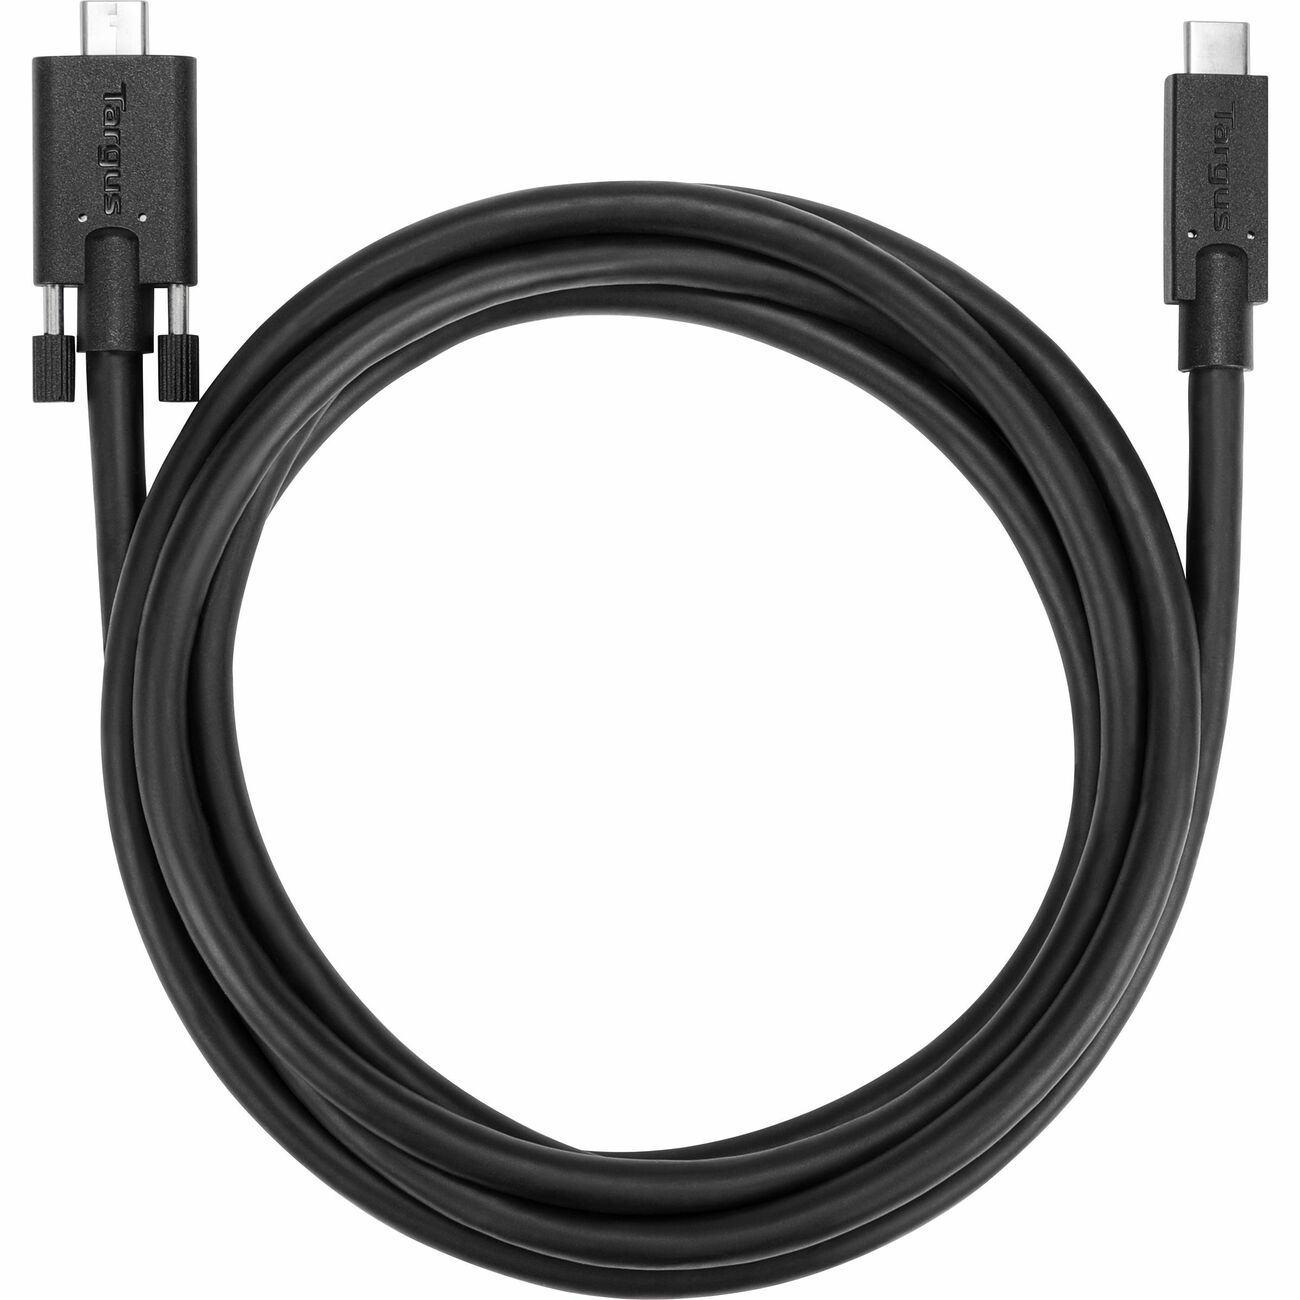 1-Meter USB-C to micro-USB 5Gbps Cable - ACC925USX: Cables & Adapters:  Targus